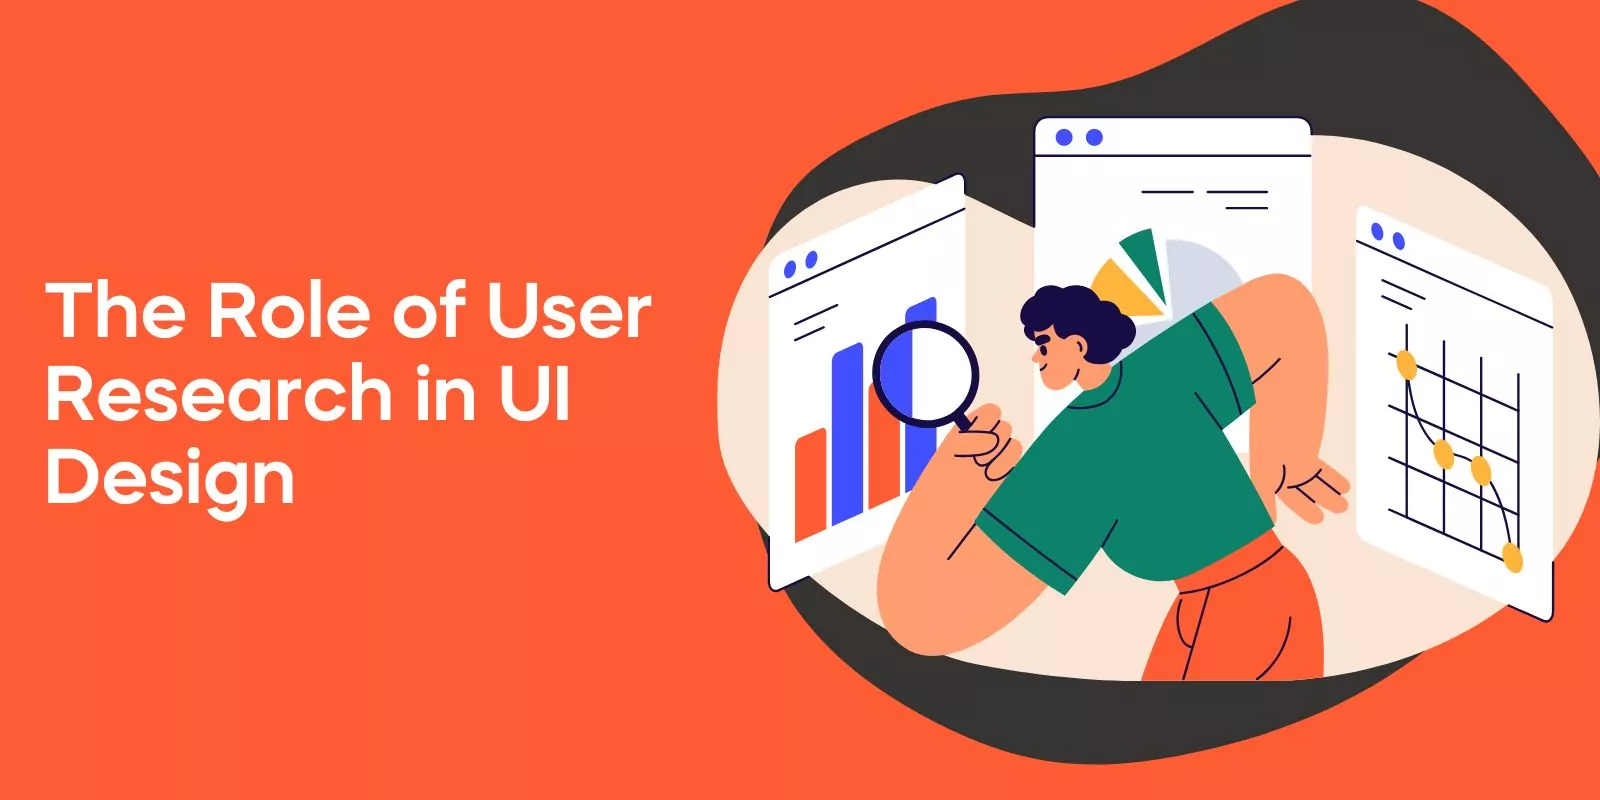 The Role of User Research in UI Design